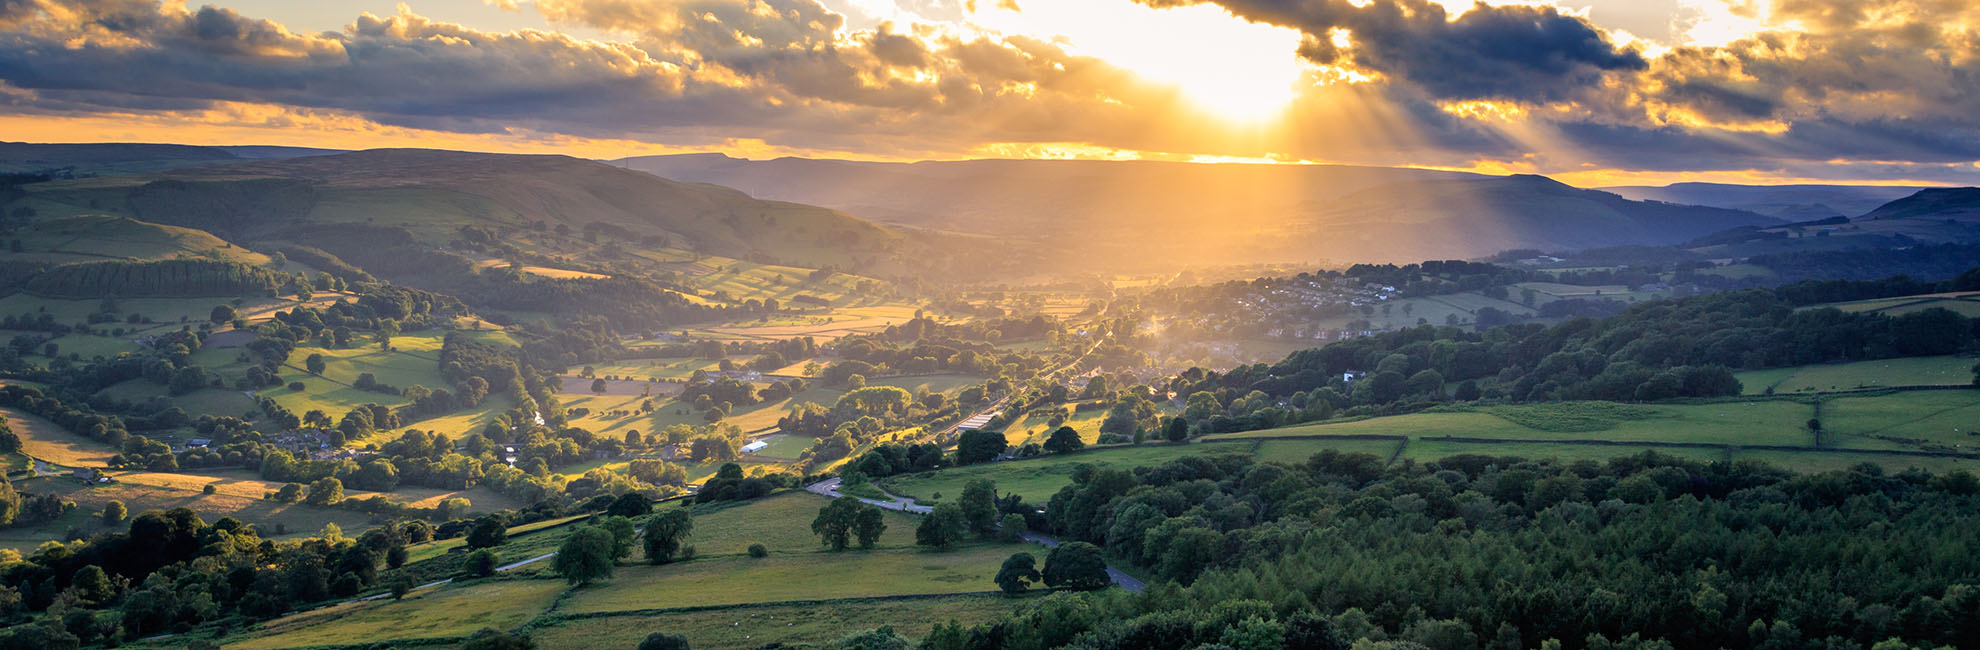 Sunset over the Peak District in Yorkshire